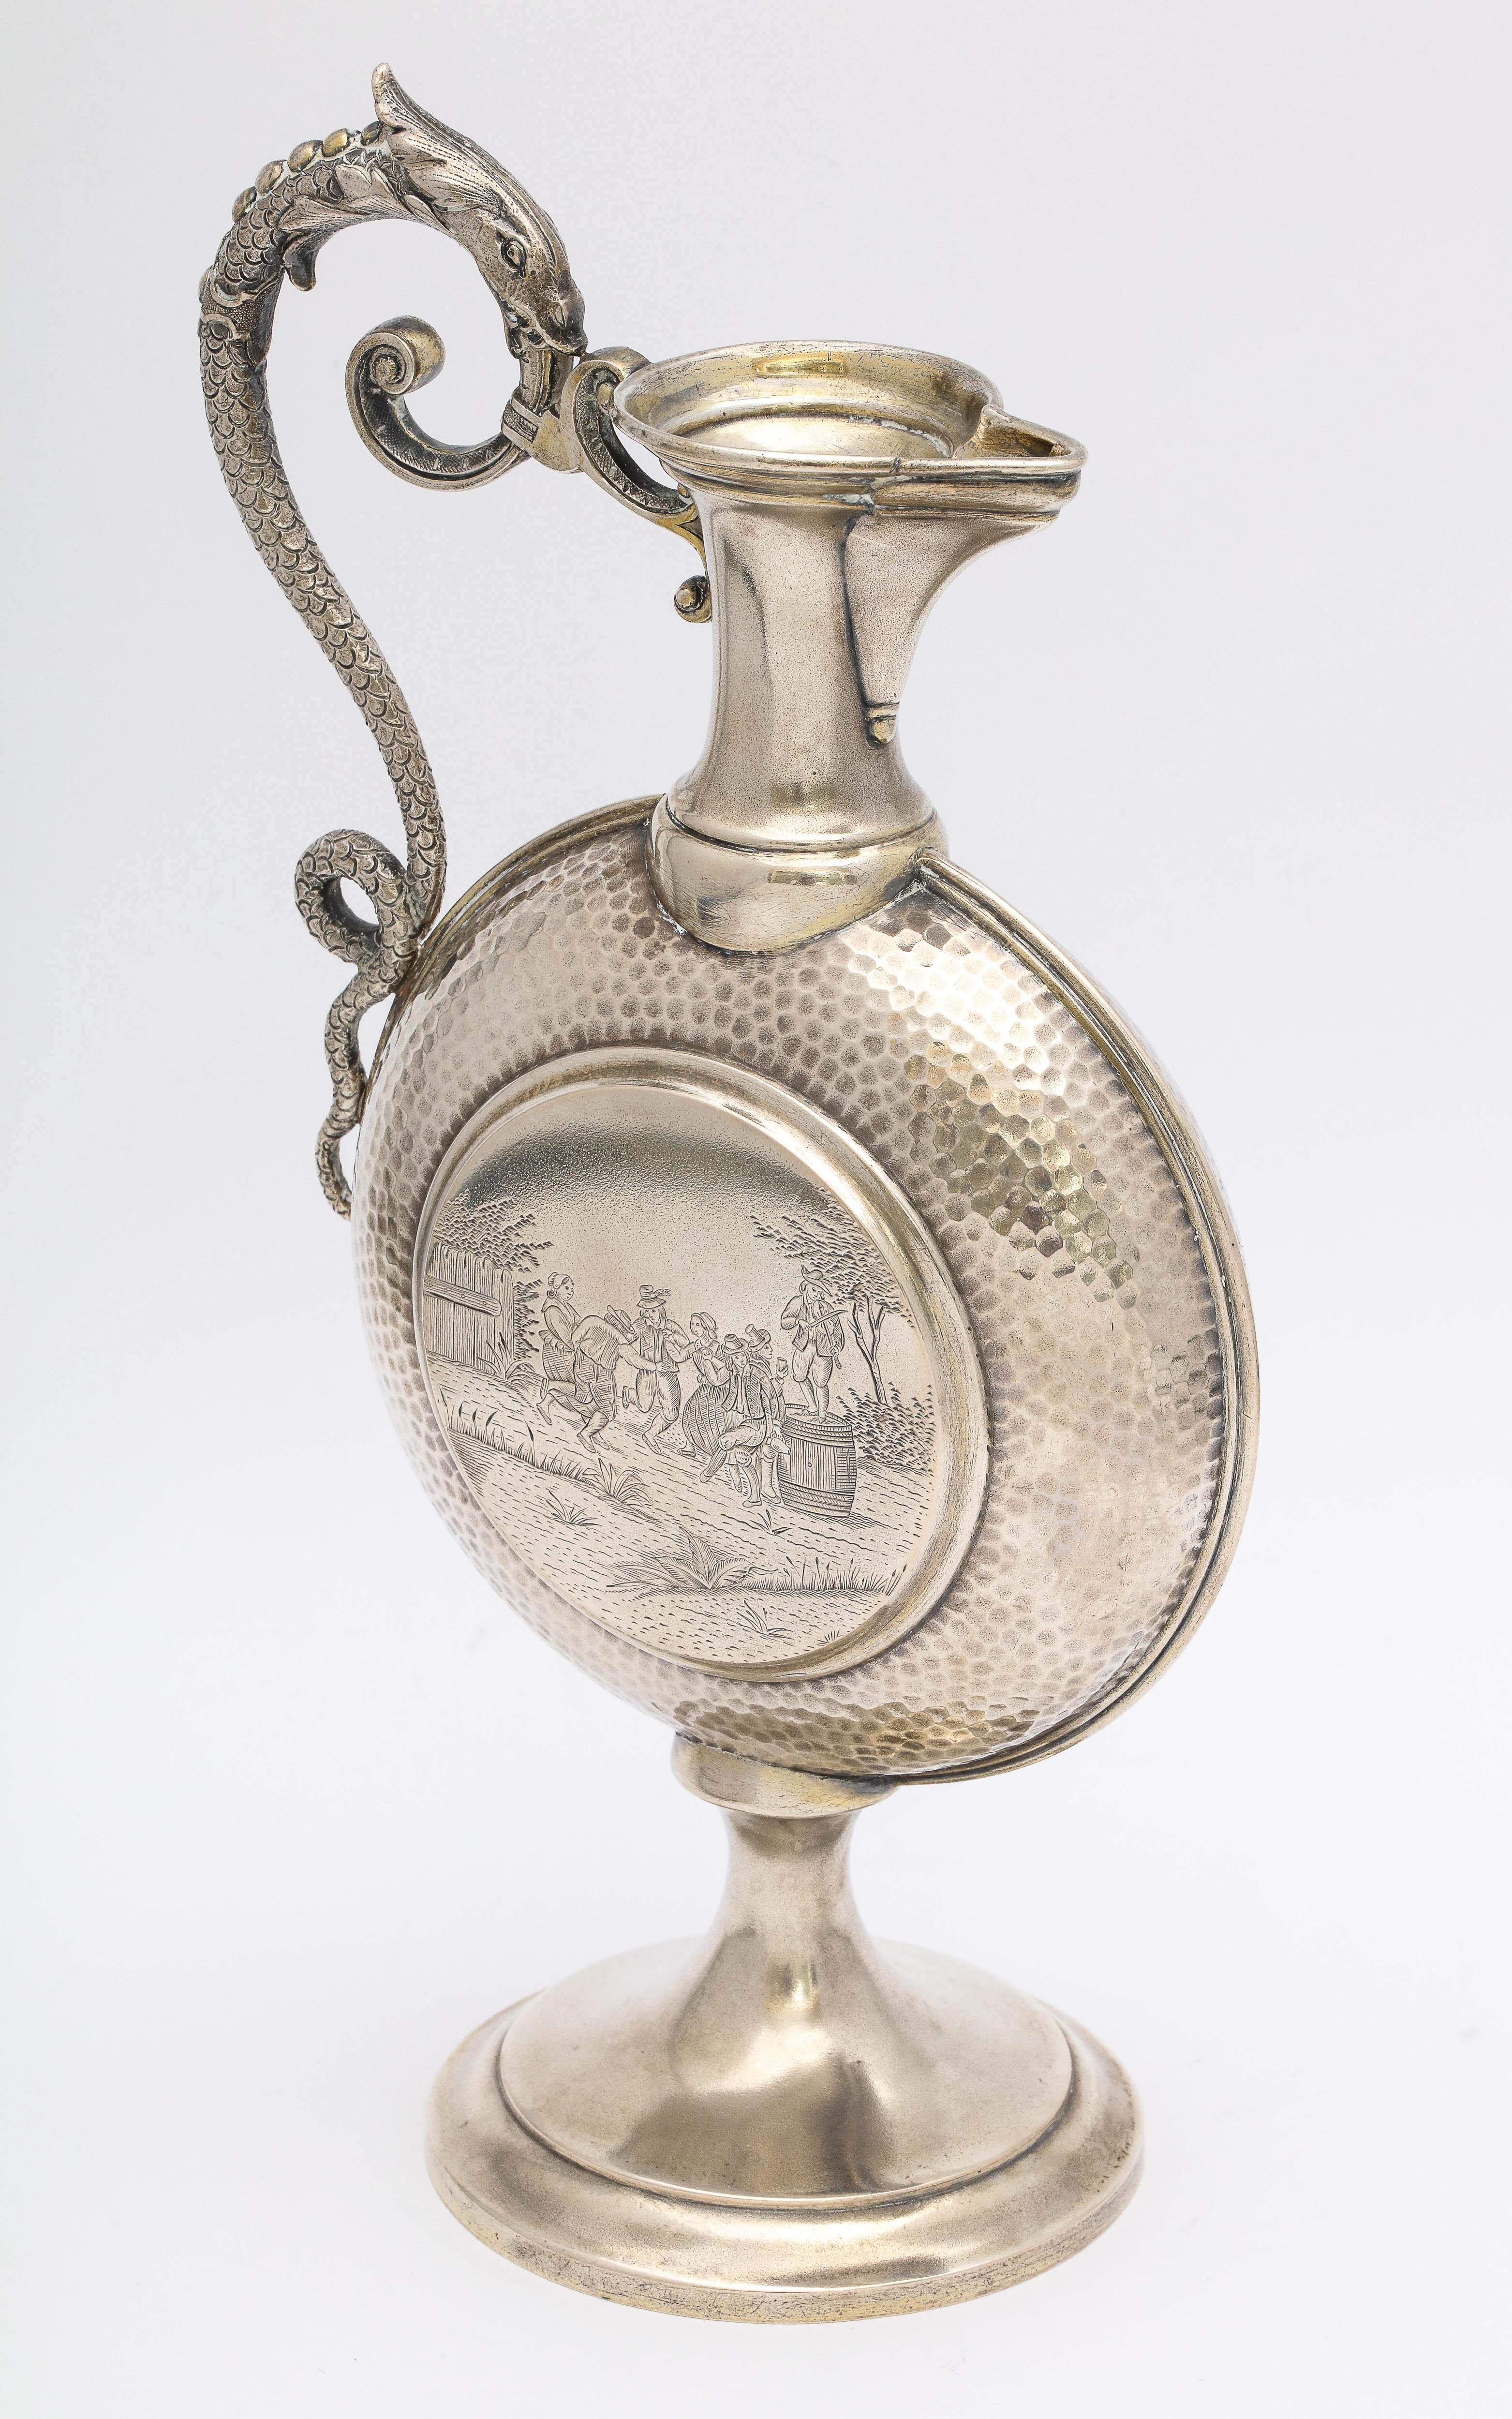 Neoclassical style, Continental Silver (.800) ewer/pitcher, Europe, circa 1910. Handle is in the form of a snake. Central portion of ewer is hand-hammered on both sides; each hammered part frames a scene. One side is a drinking scene; the other